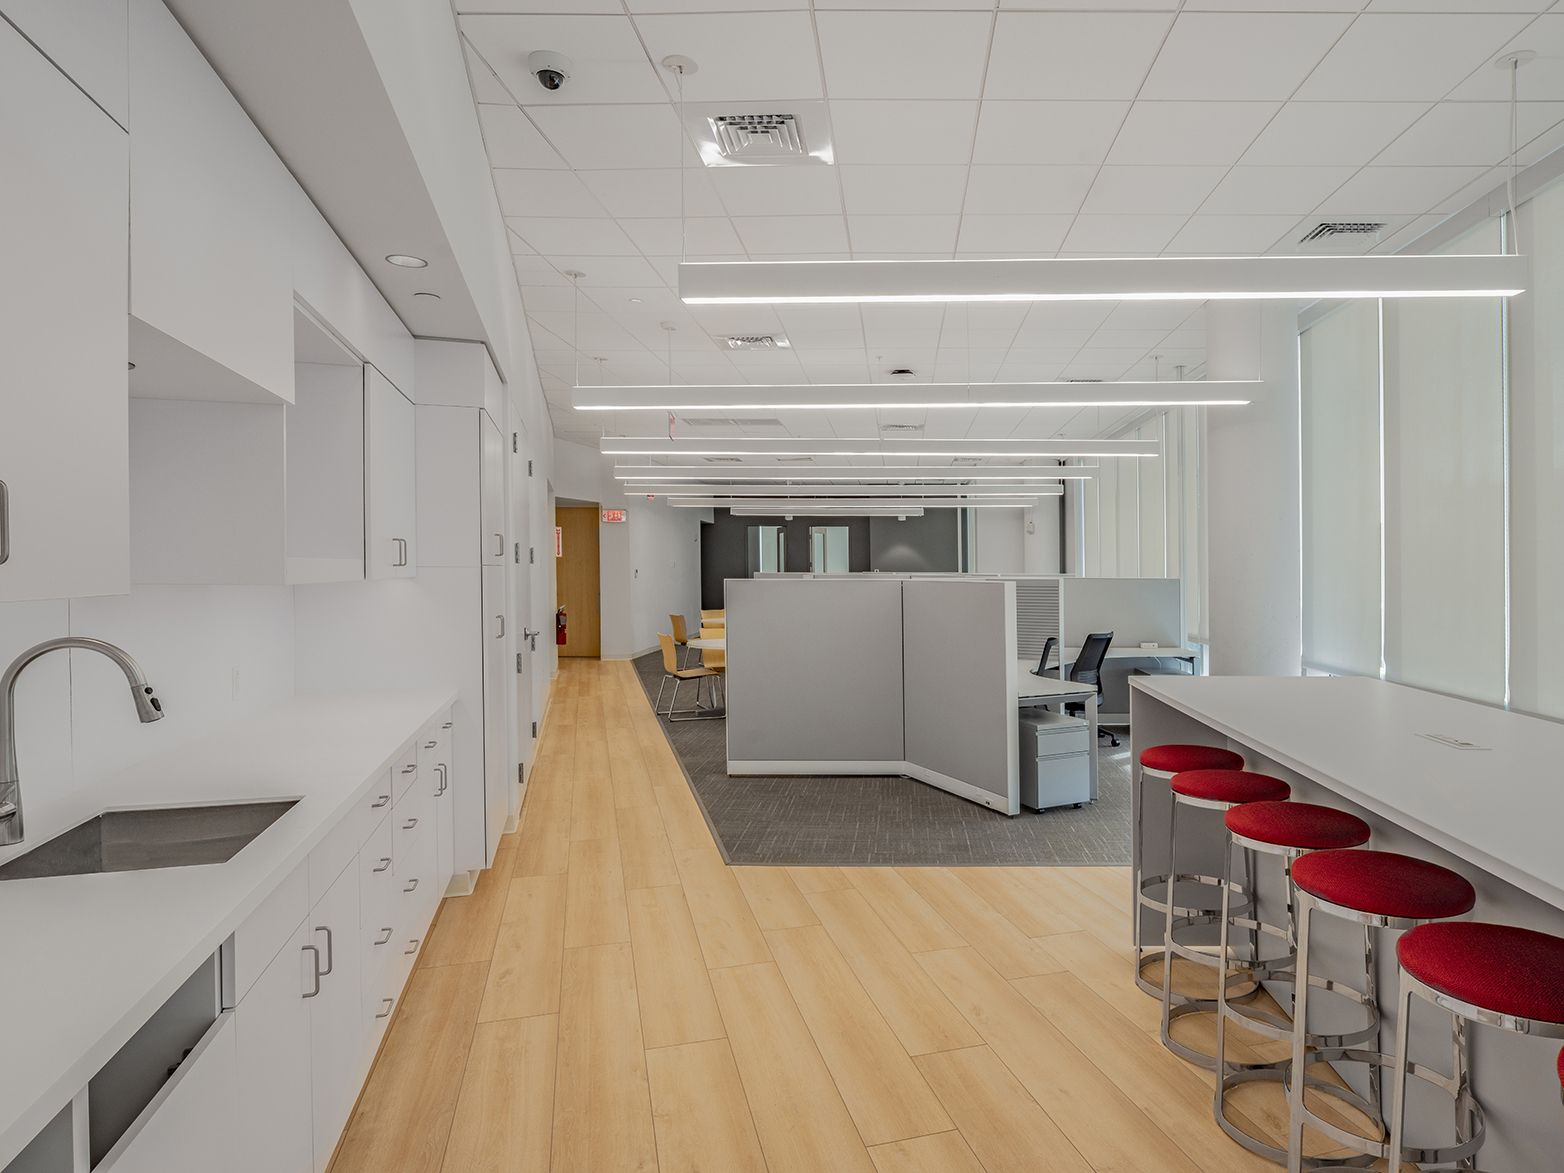 WISE CONSTRUCTION COMPLETES FIT-OUT FOR HARVARD SCHOOL OF PUBLIC HEALTH